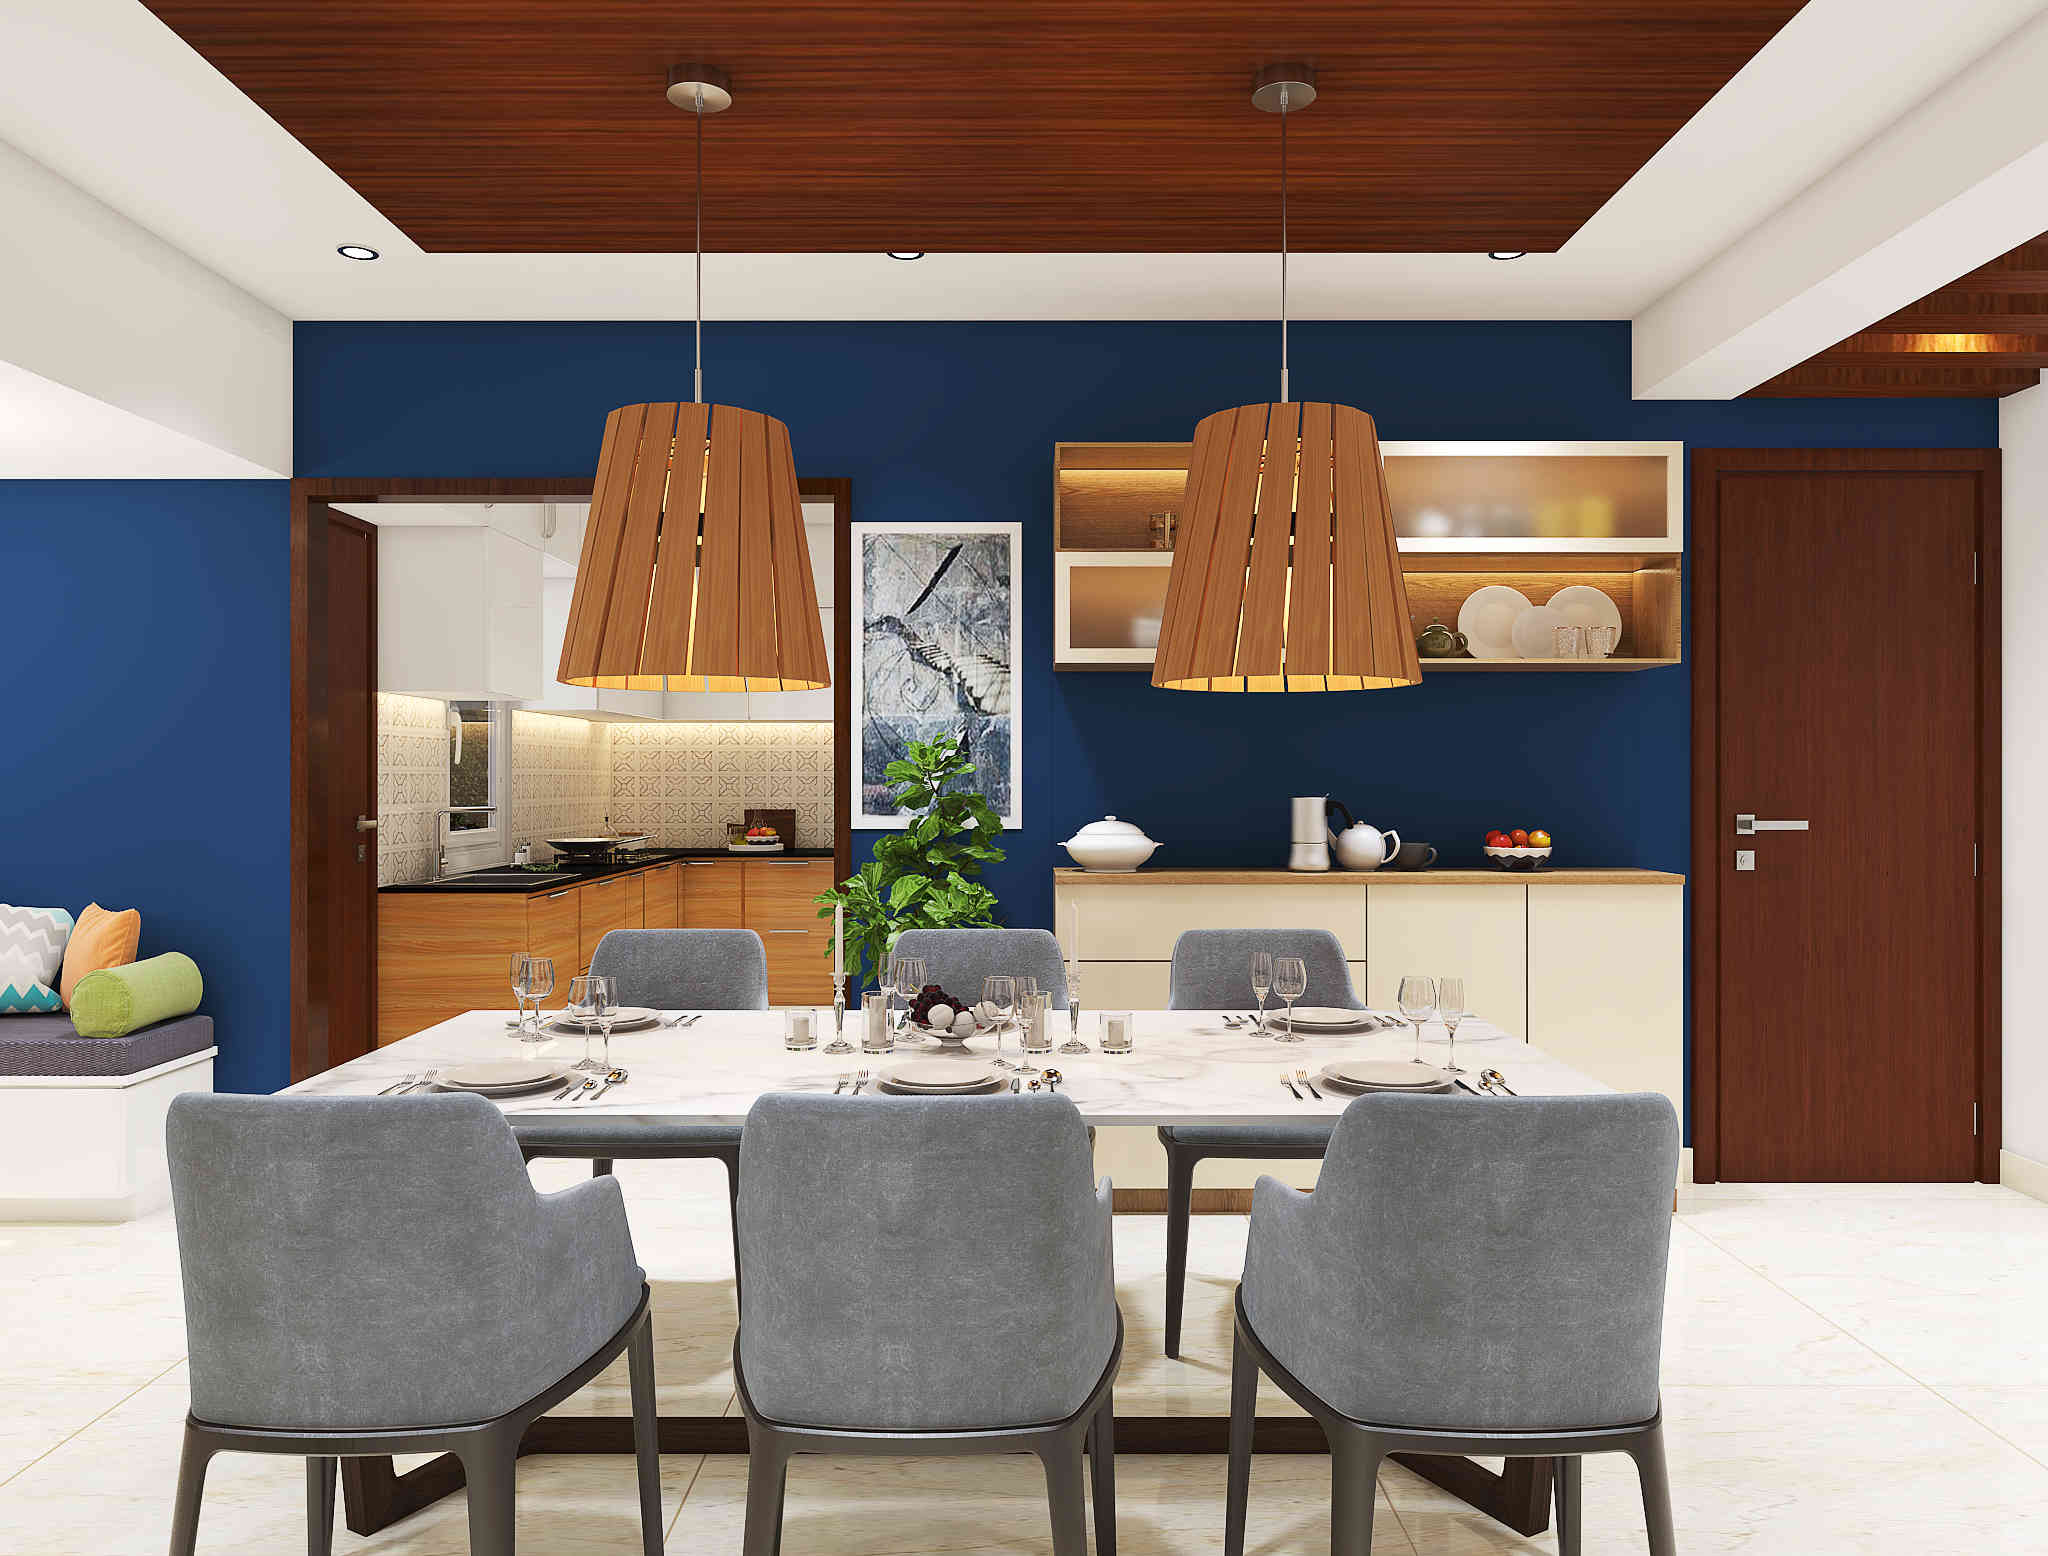 Luxurious 6-Seater Dining Room Design With Drop Lights